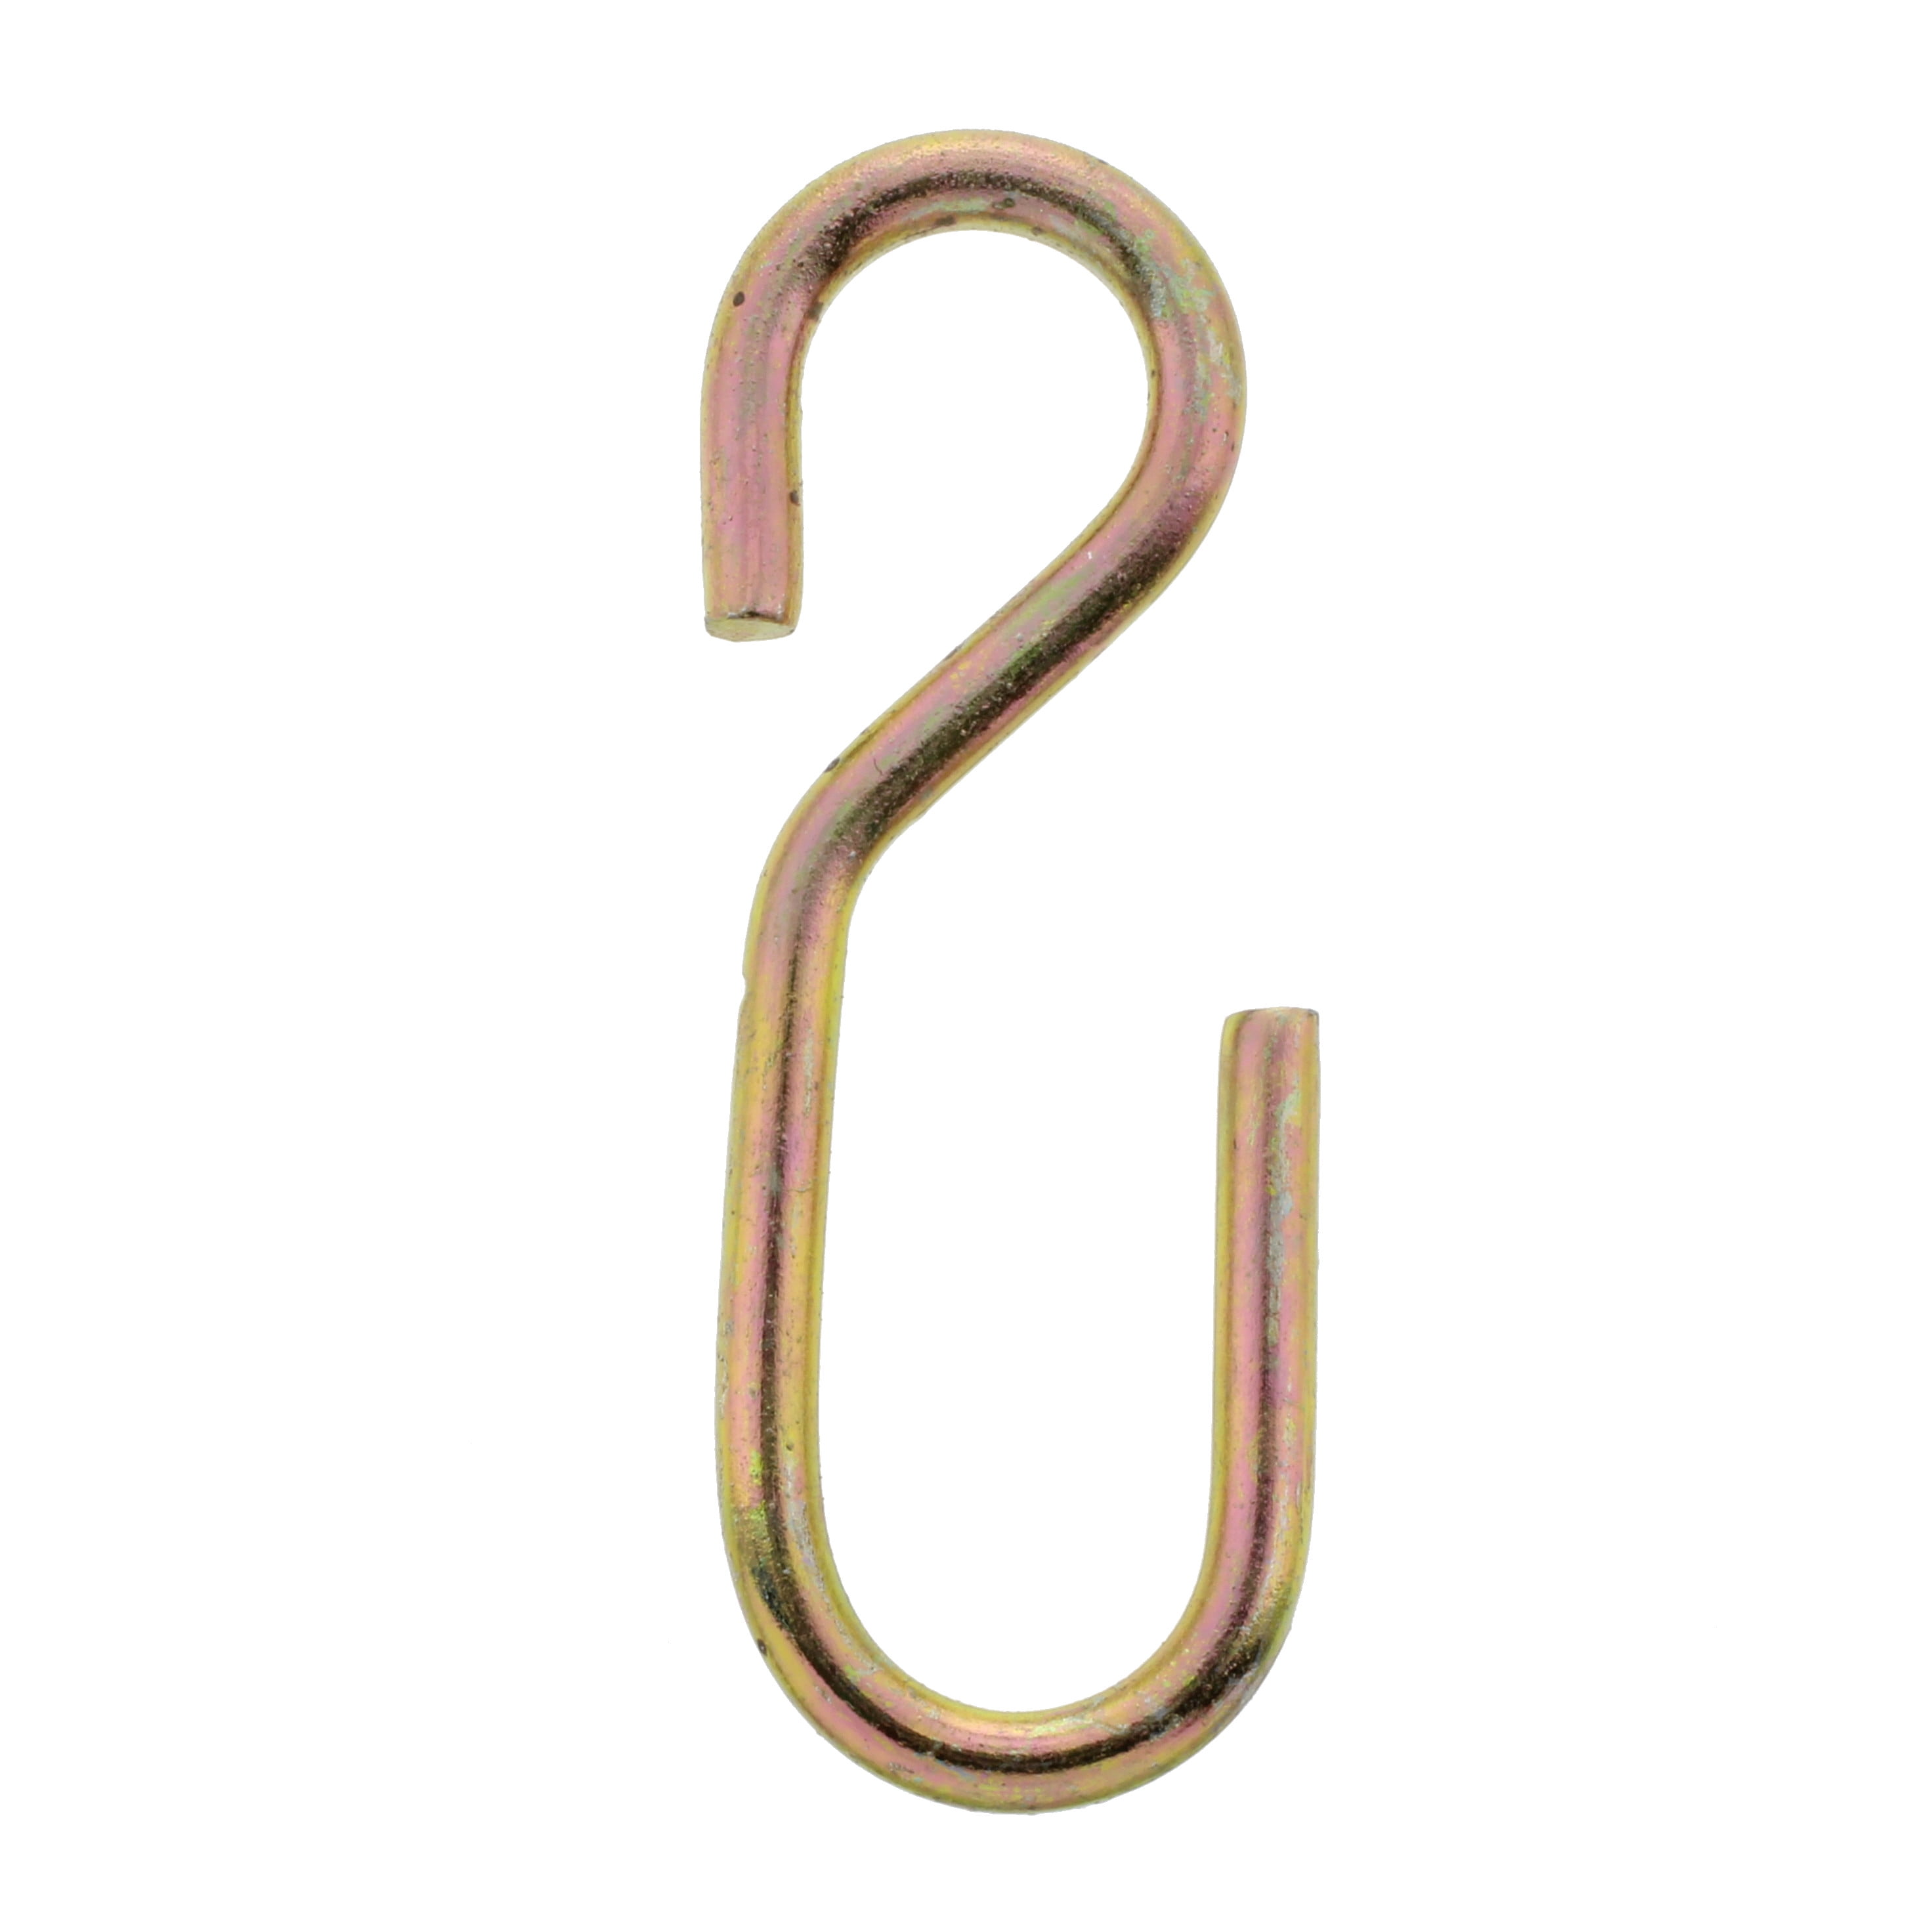 Dolls House Fancy Gold Plated Brass S Hooks Miniature Hardware Pack of 4 